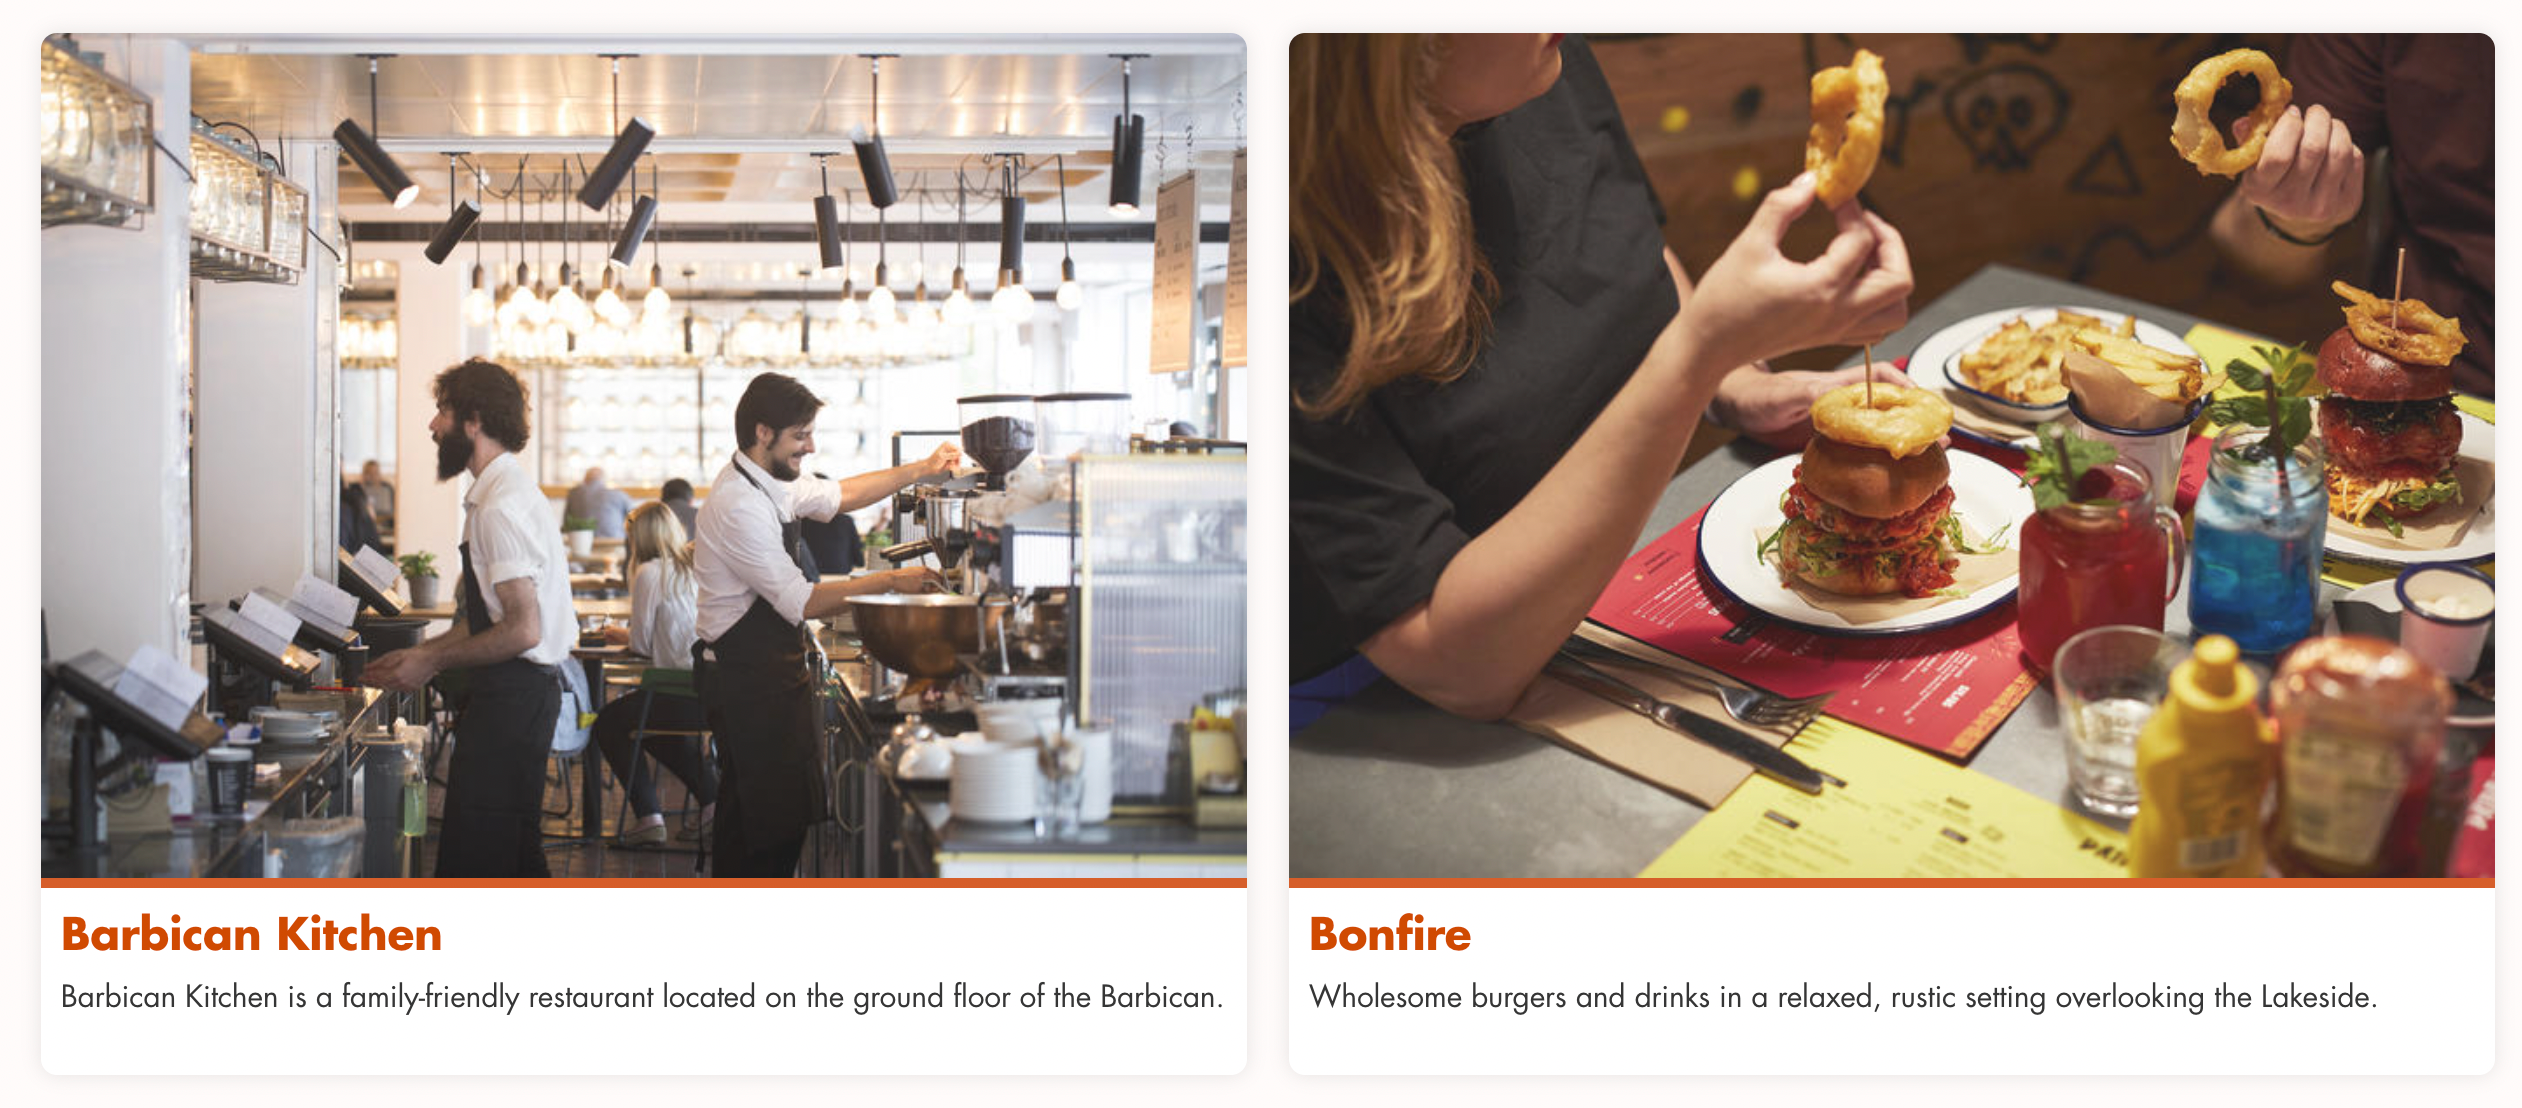 Barbican Kitchen and Bonfire at Barbican Centre. Barbican Kitchen is a family-friendly restaurant on the ground floor. Bonfire serves burgers and drinks in a relaxed, rustic setting overlooking the Lakeside